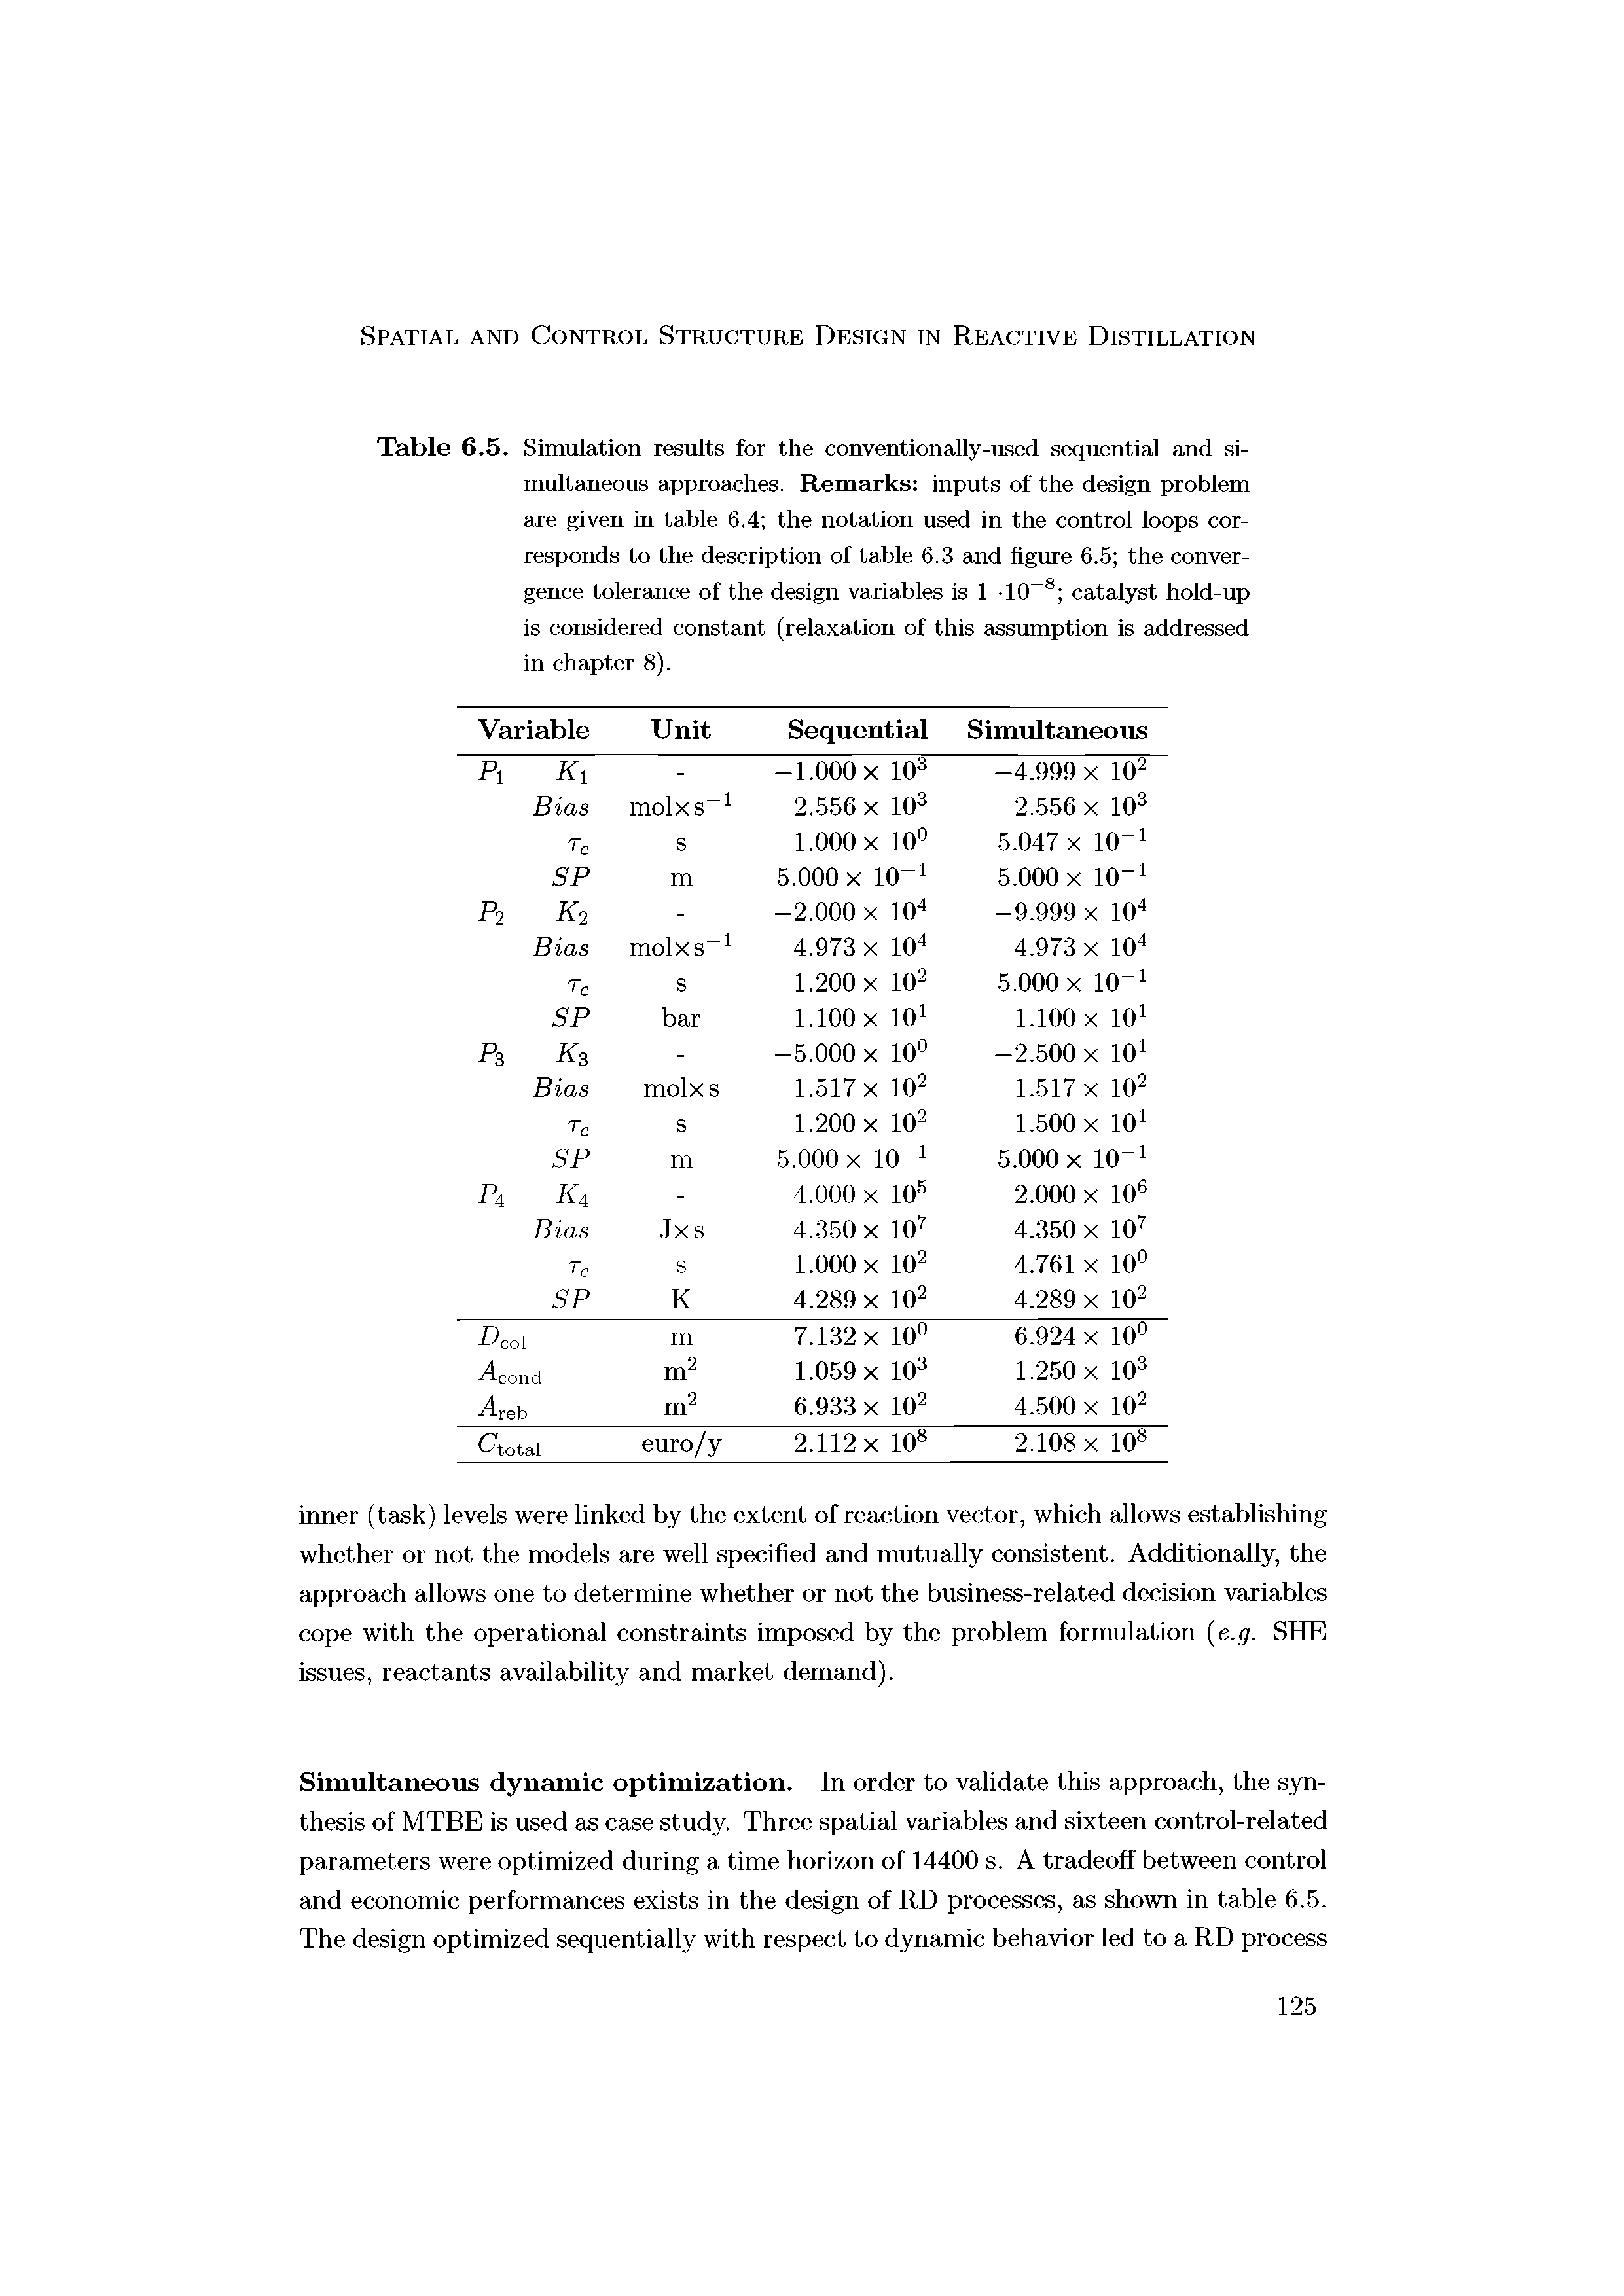 Table 6.5. Simulation results for the conventionally-used sequential and simultaneous approaches. Remarks inputs of the design problem are given in table 6.4 the notation used in the control loops corresponds to the description of table 6.3 and figure 6.5 the convergence tolerance of the design variables is 1 -10 catalyst hold-up is considered constant (relaxation of this assumption is addressed in chapter 8).